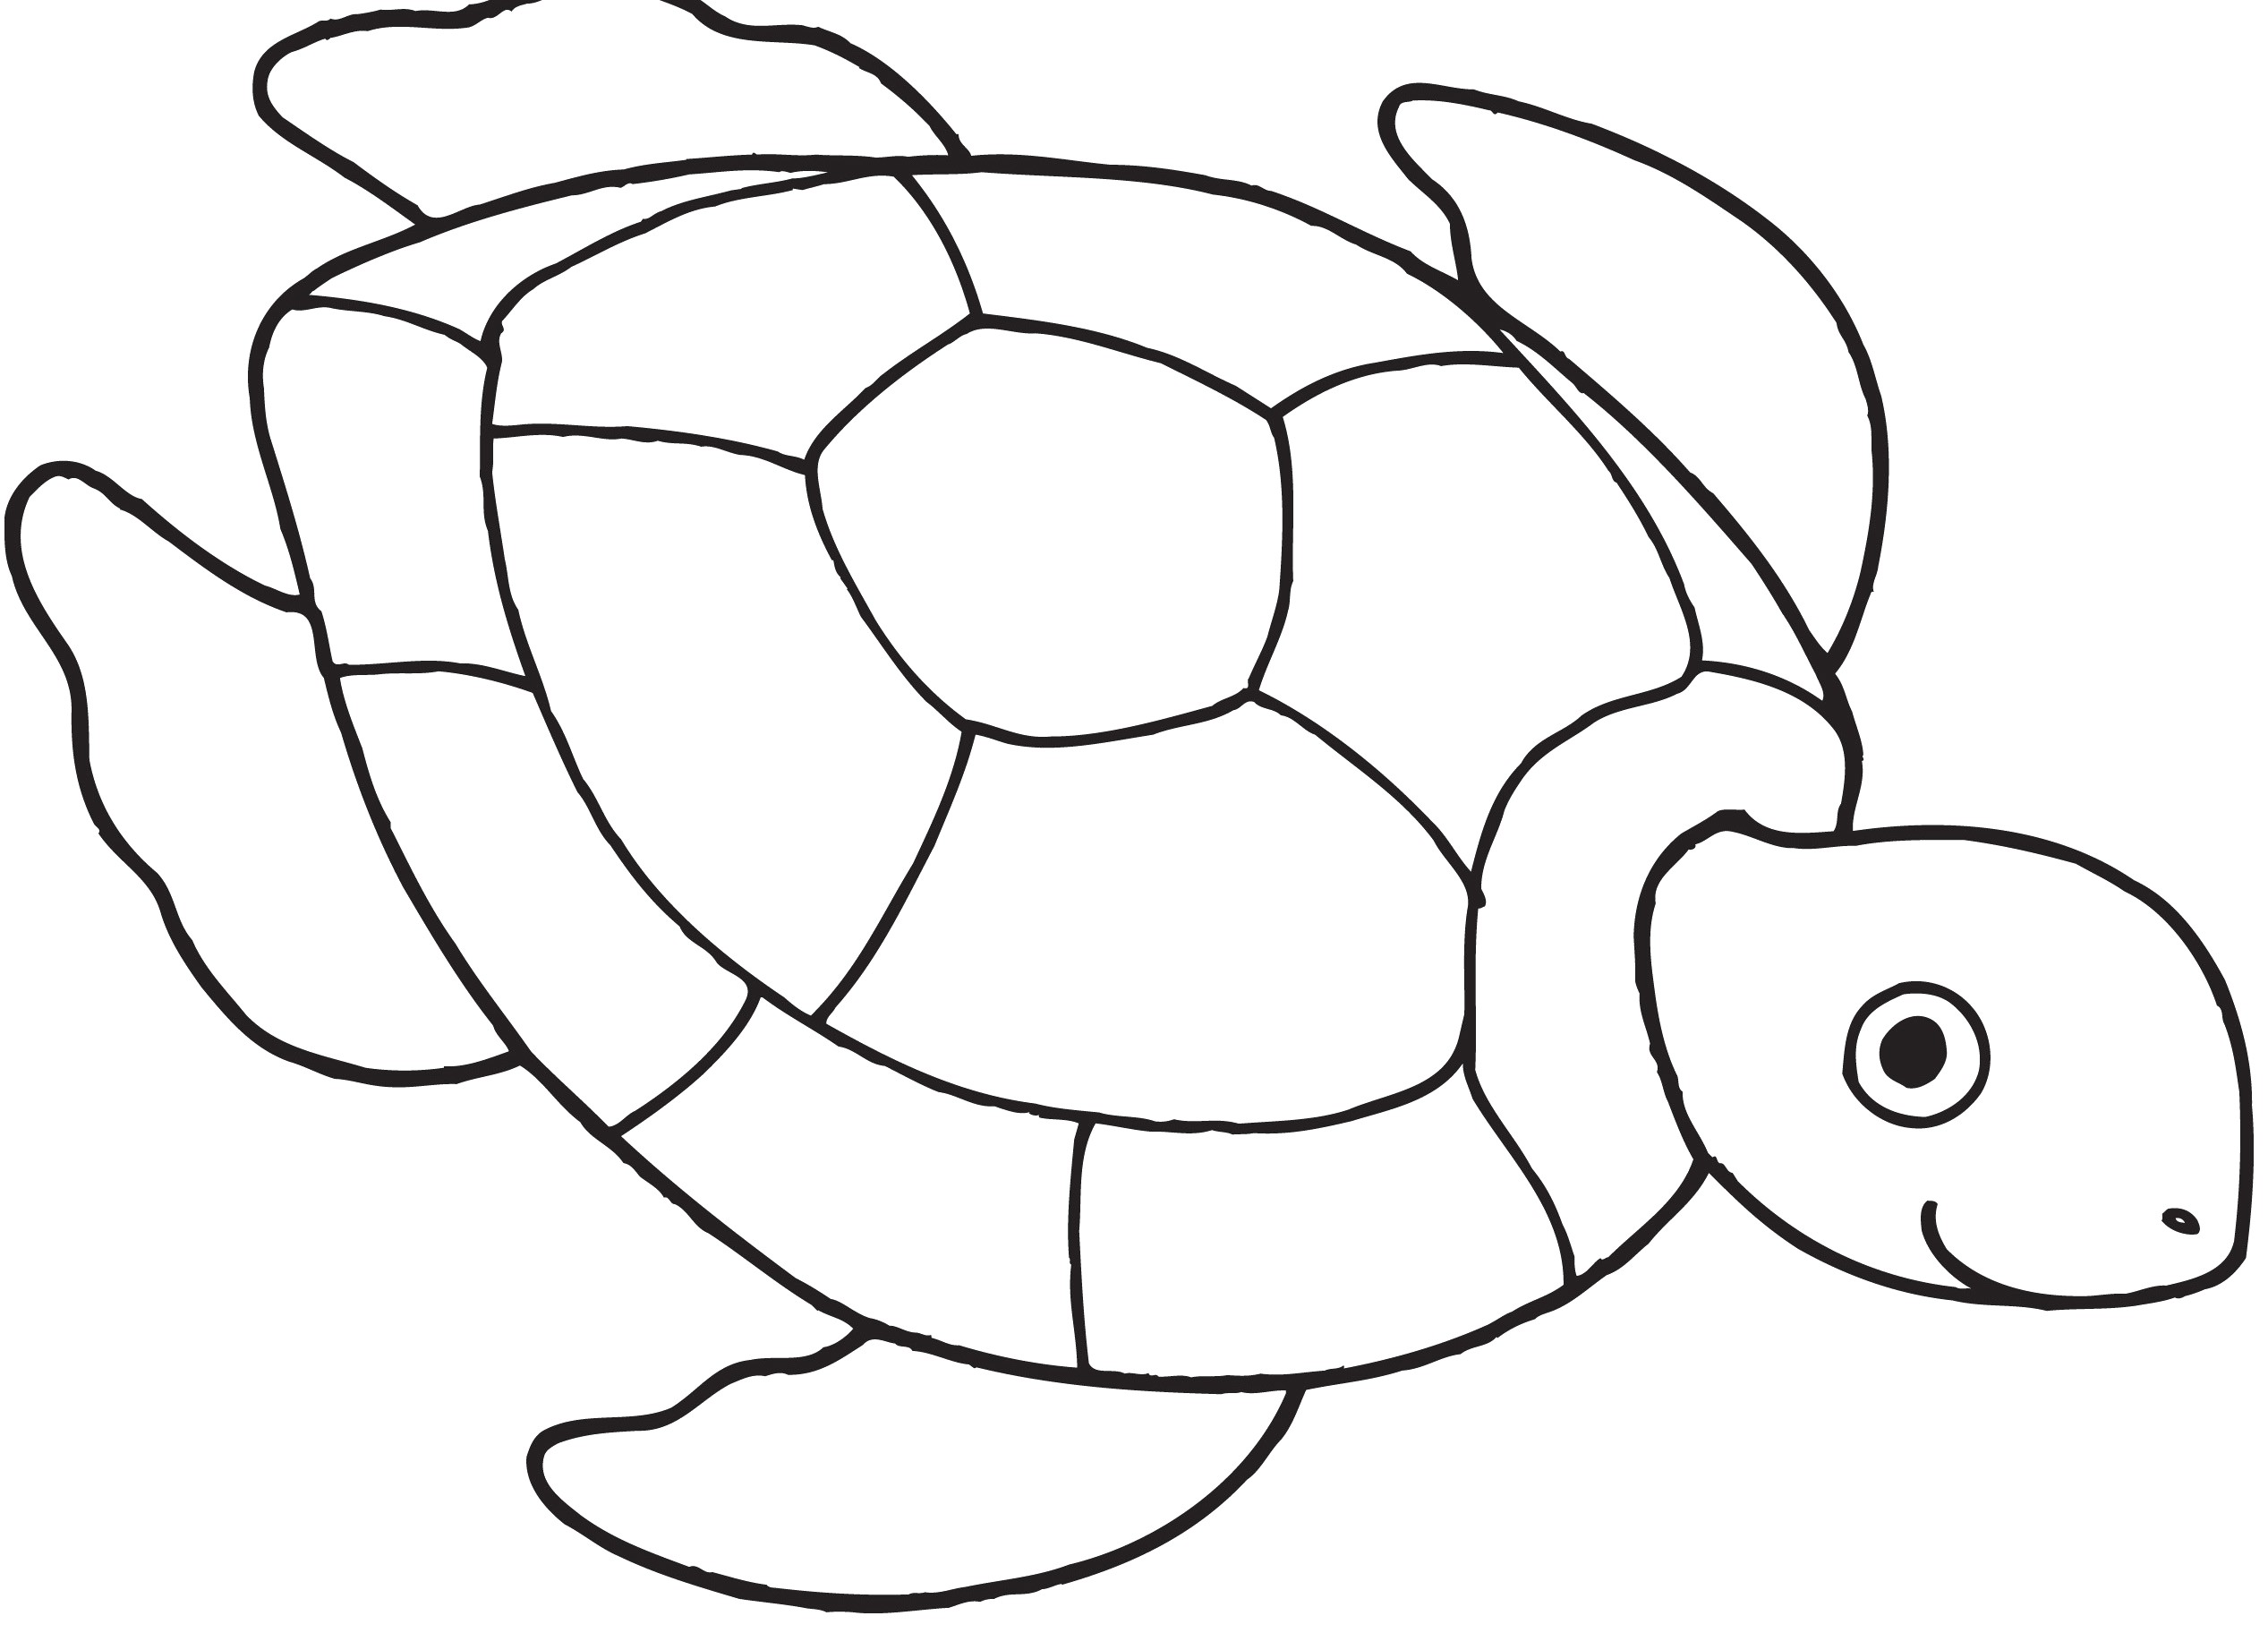 Turtle clipart black and white 3 » Clipart Station.